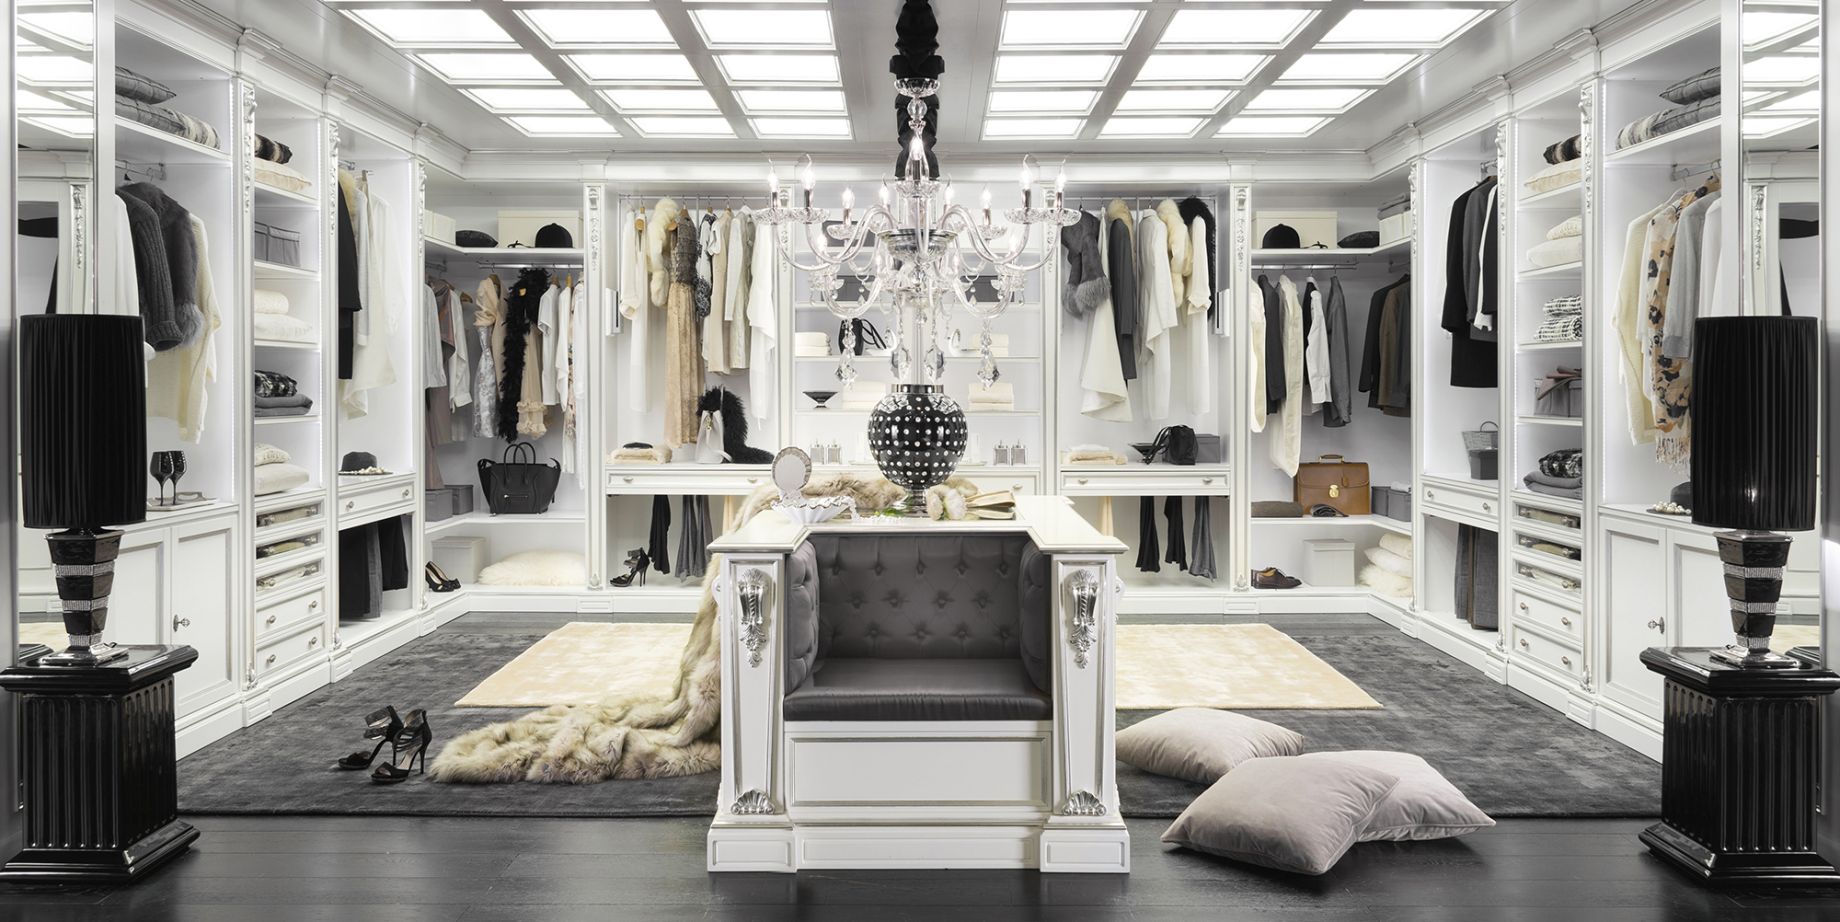 Classic modern walk-in closets enriched by silver finishes